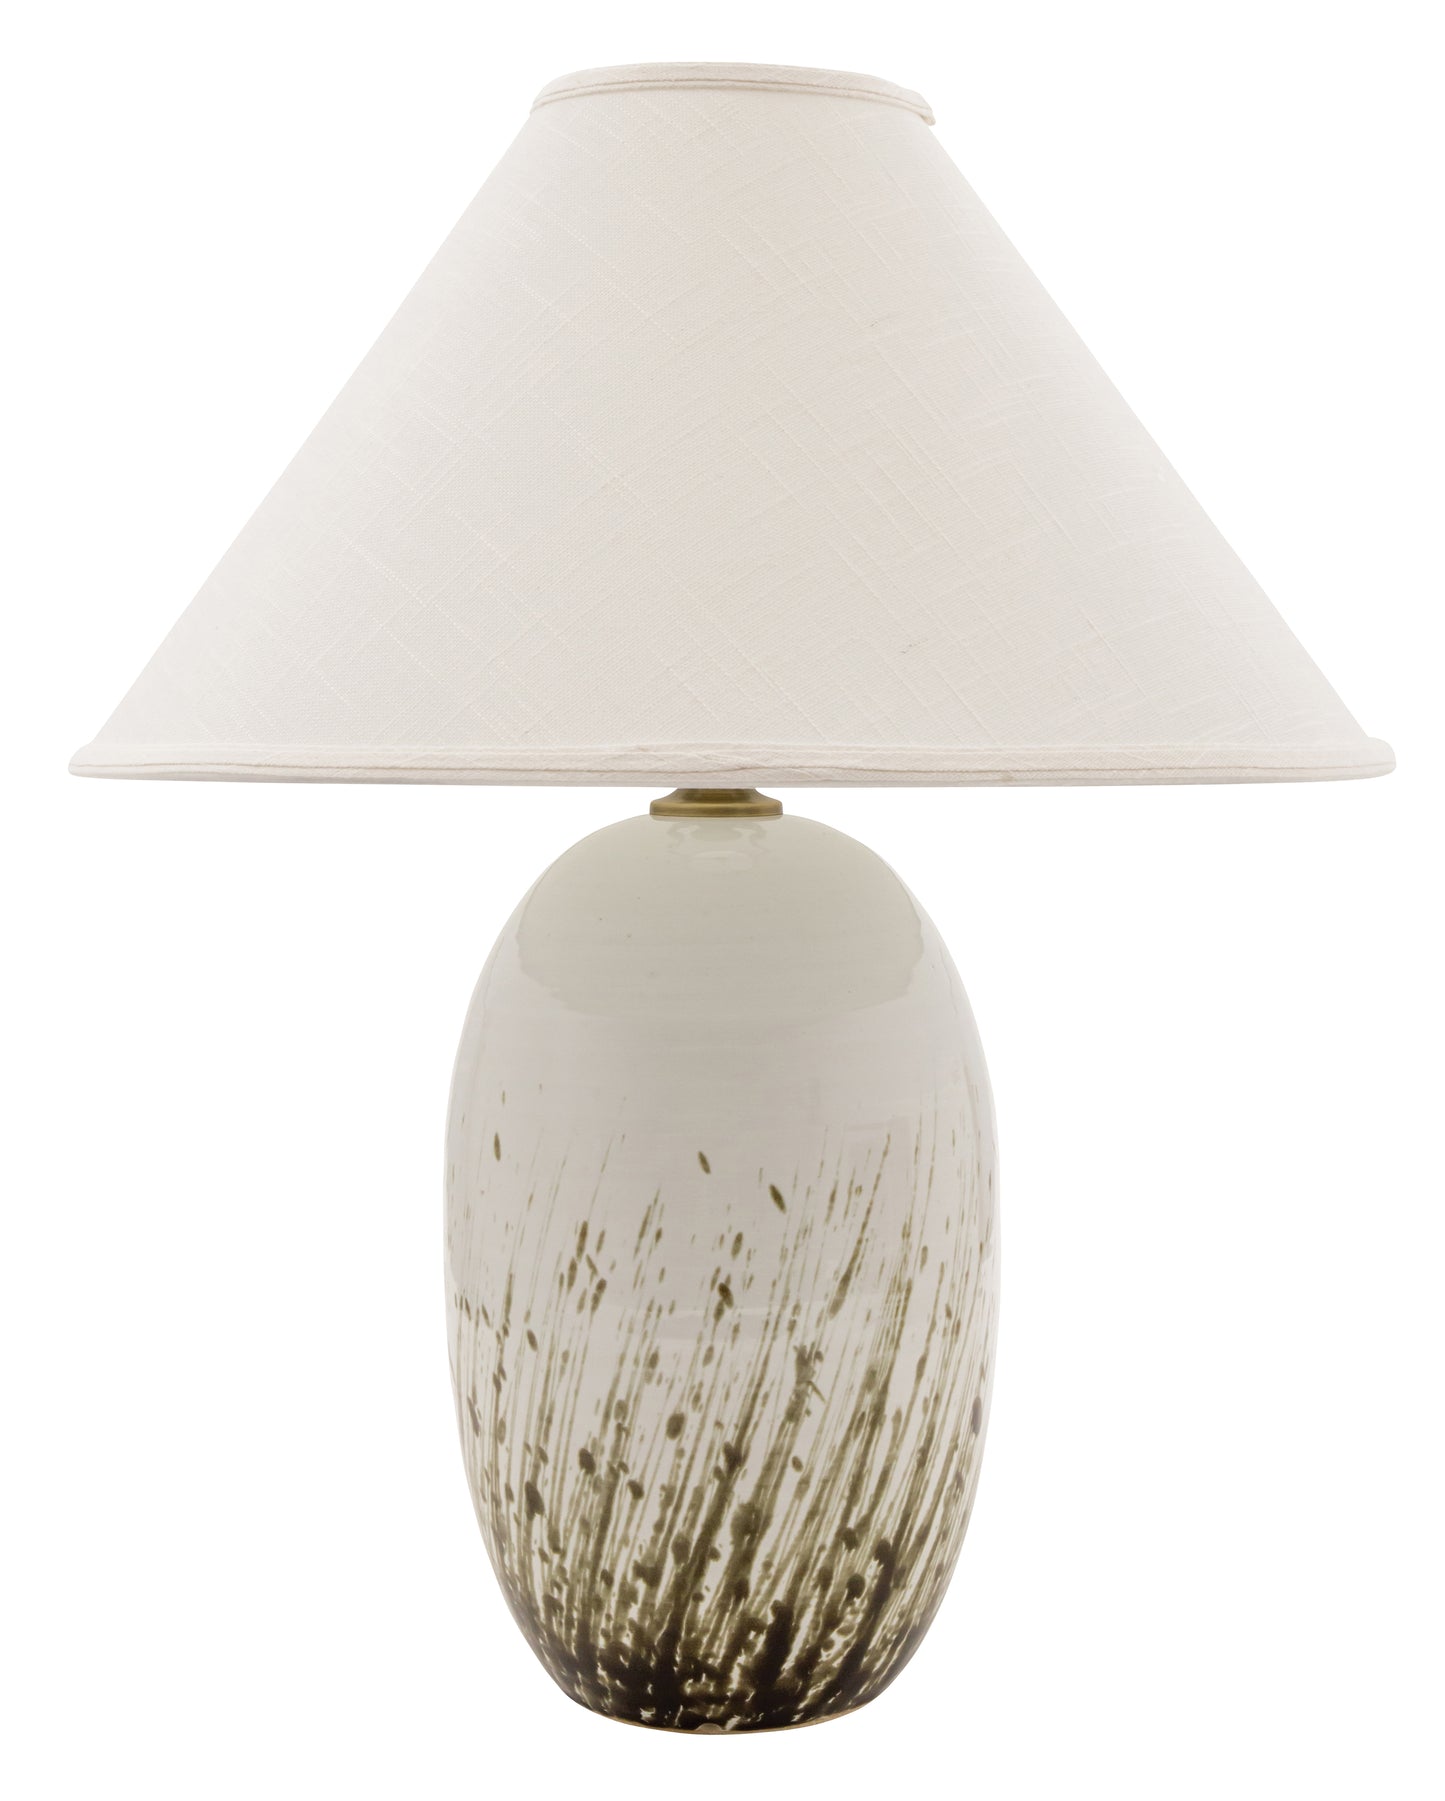 House of Troy Scatchard 28.5" Stoneware Table Lamp in Decorated White Gloss GS150-DWG